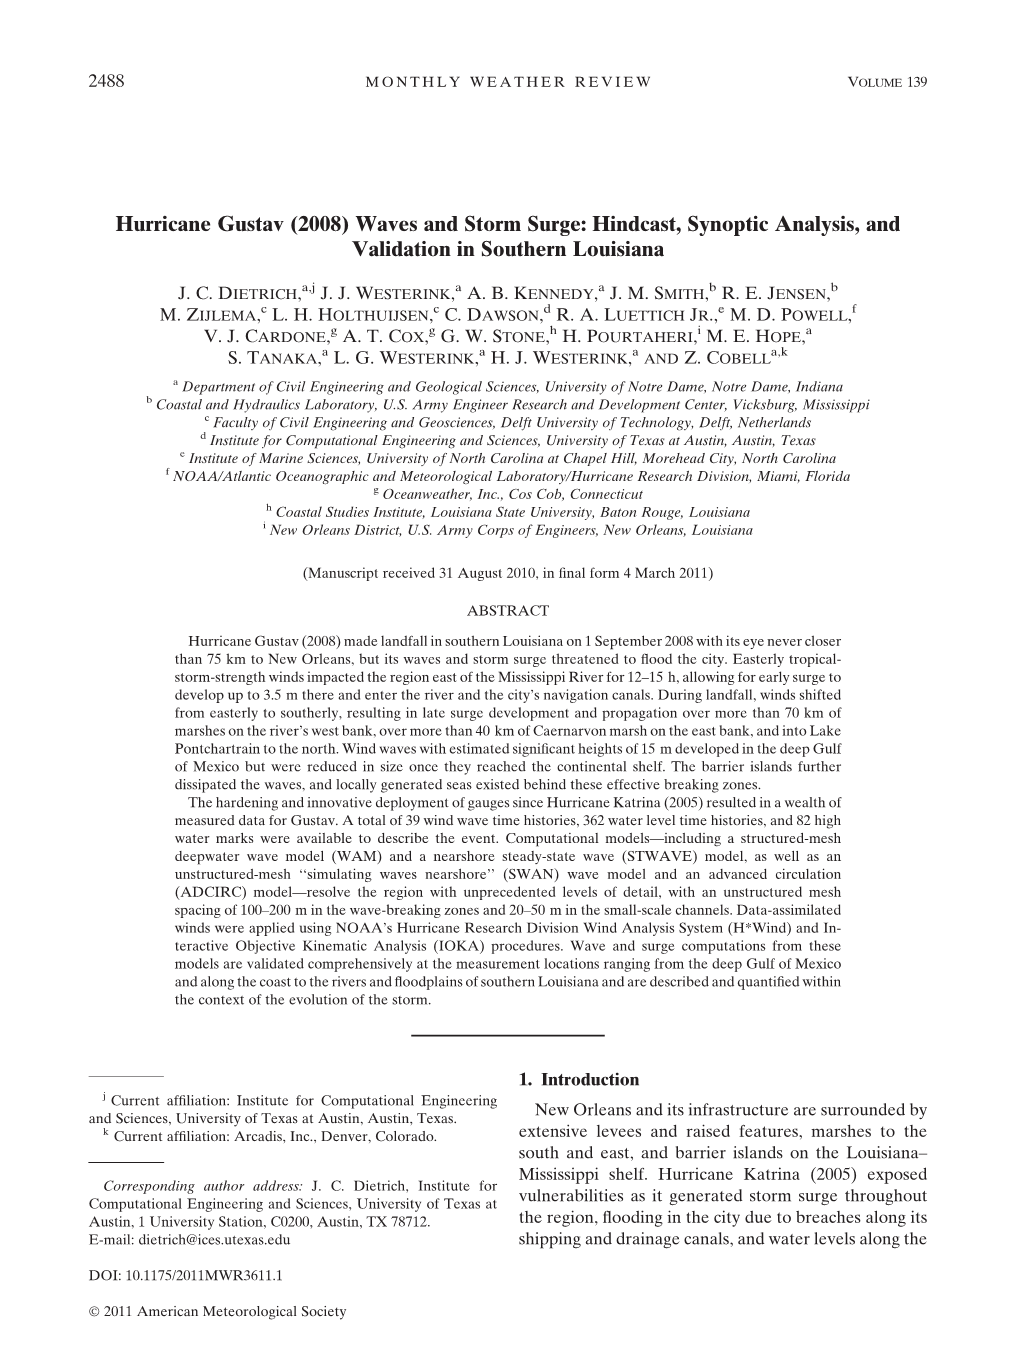 Hurricane Gustav (2008) Waves and Storm Surge: Hindcast, Synoptic Analysis, and Validation in Southern Louisiana